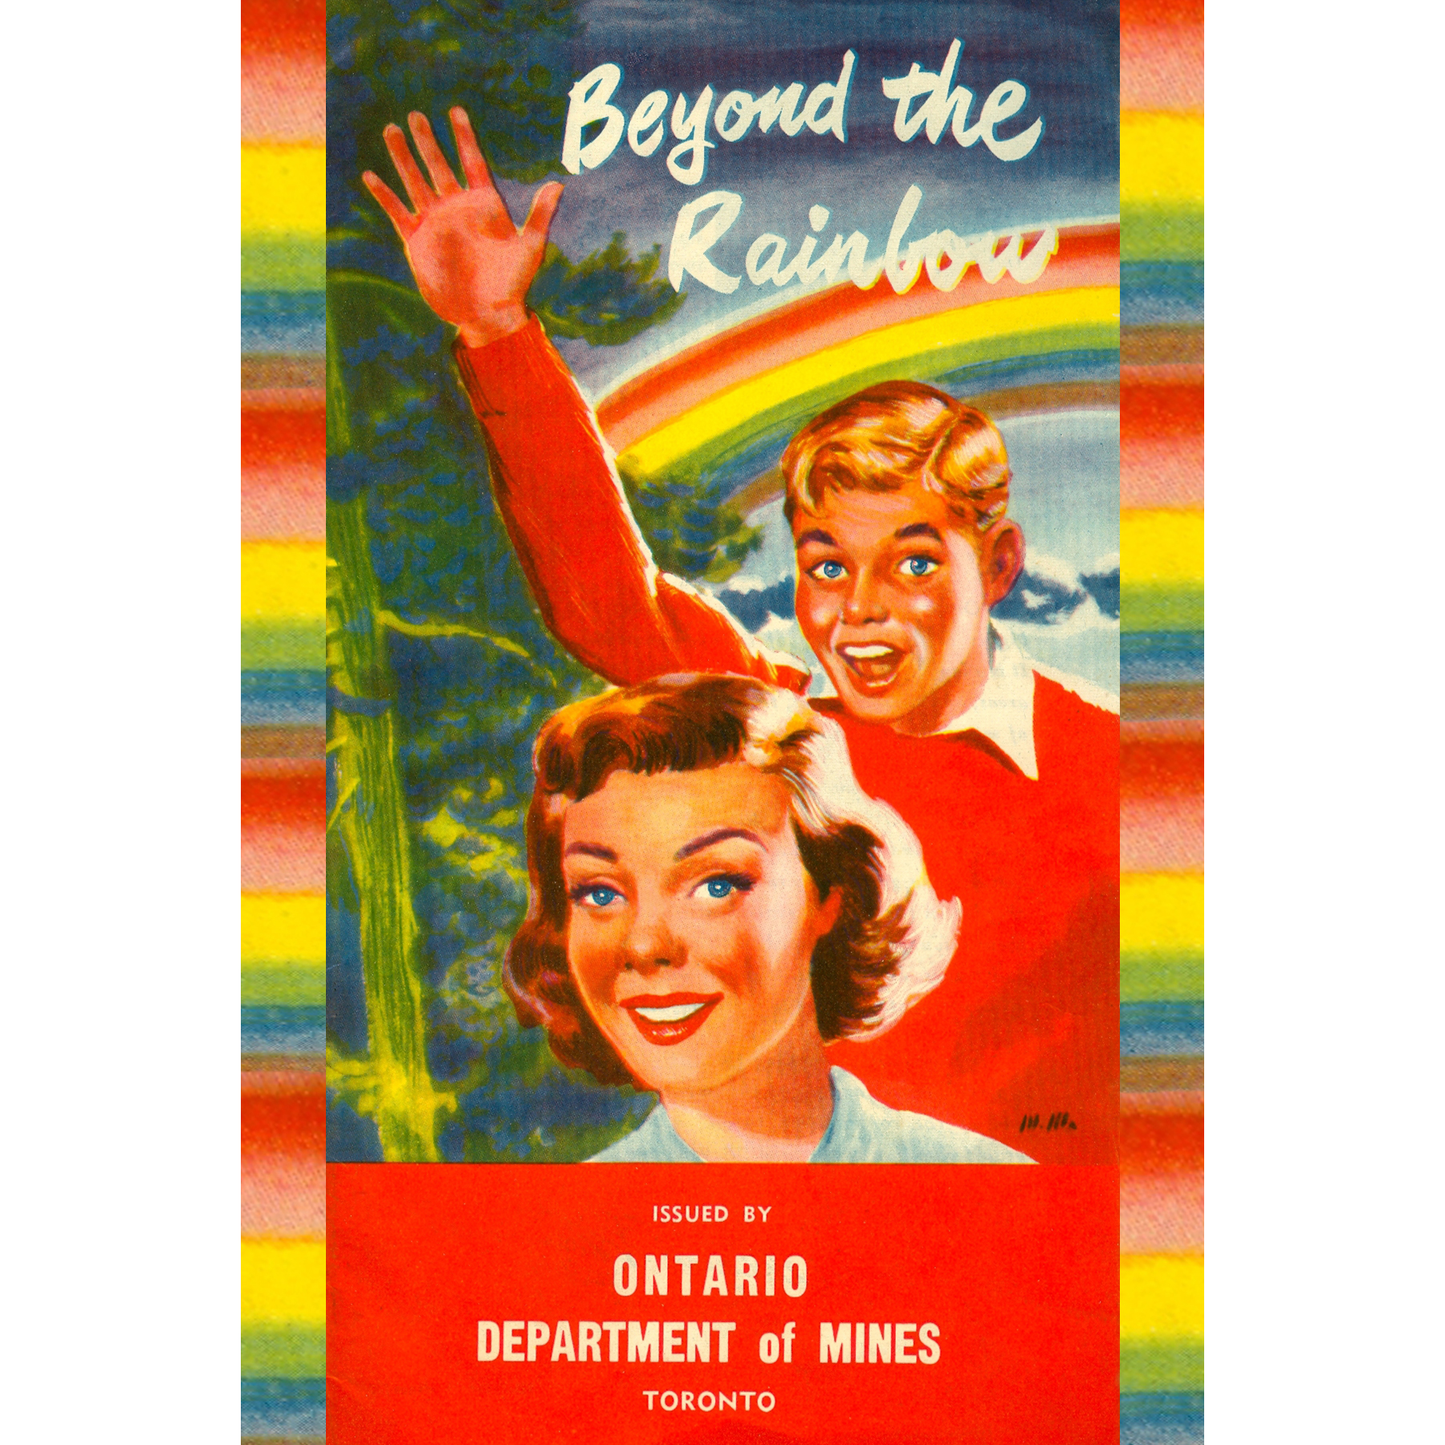 CCT0211 Beyond the Rainbow c1953 Pamphlet Cover Postcard